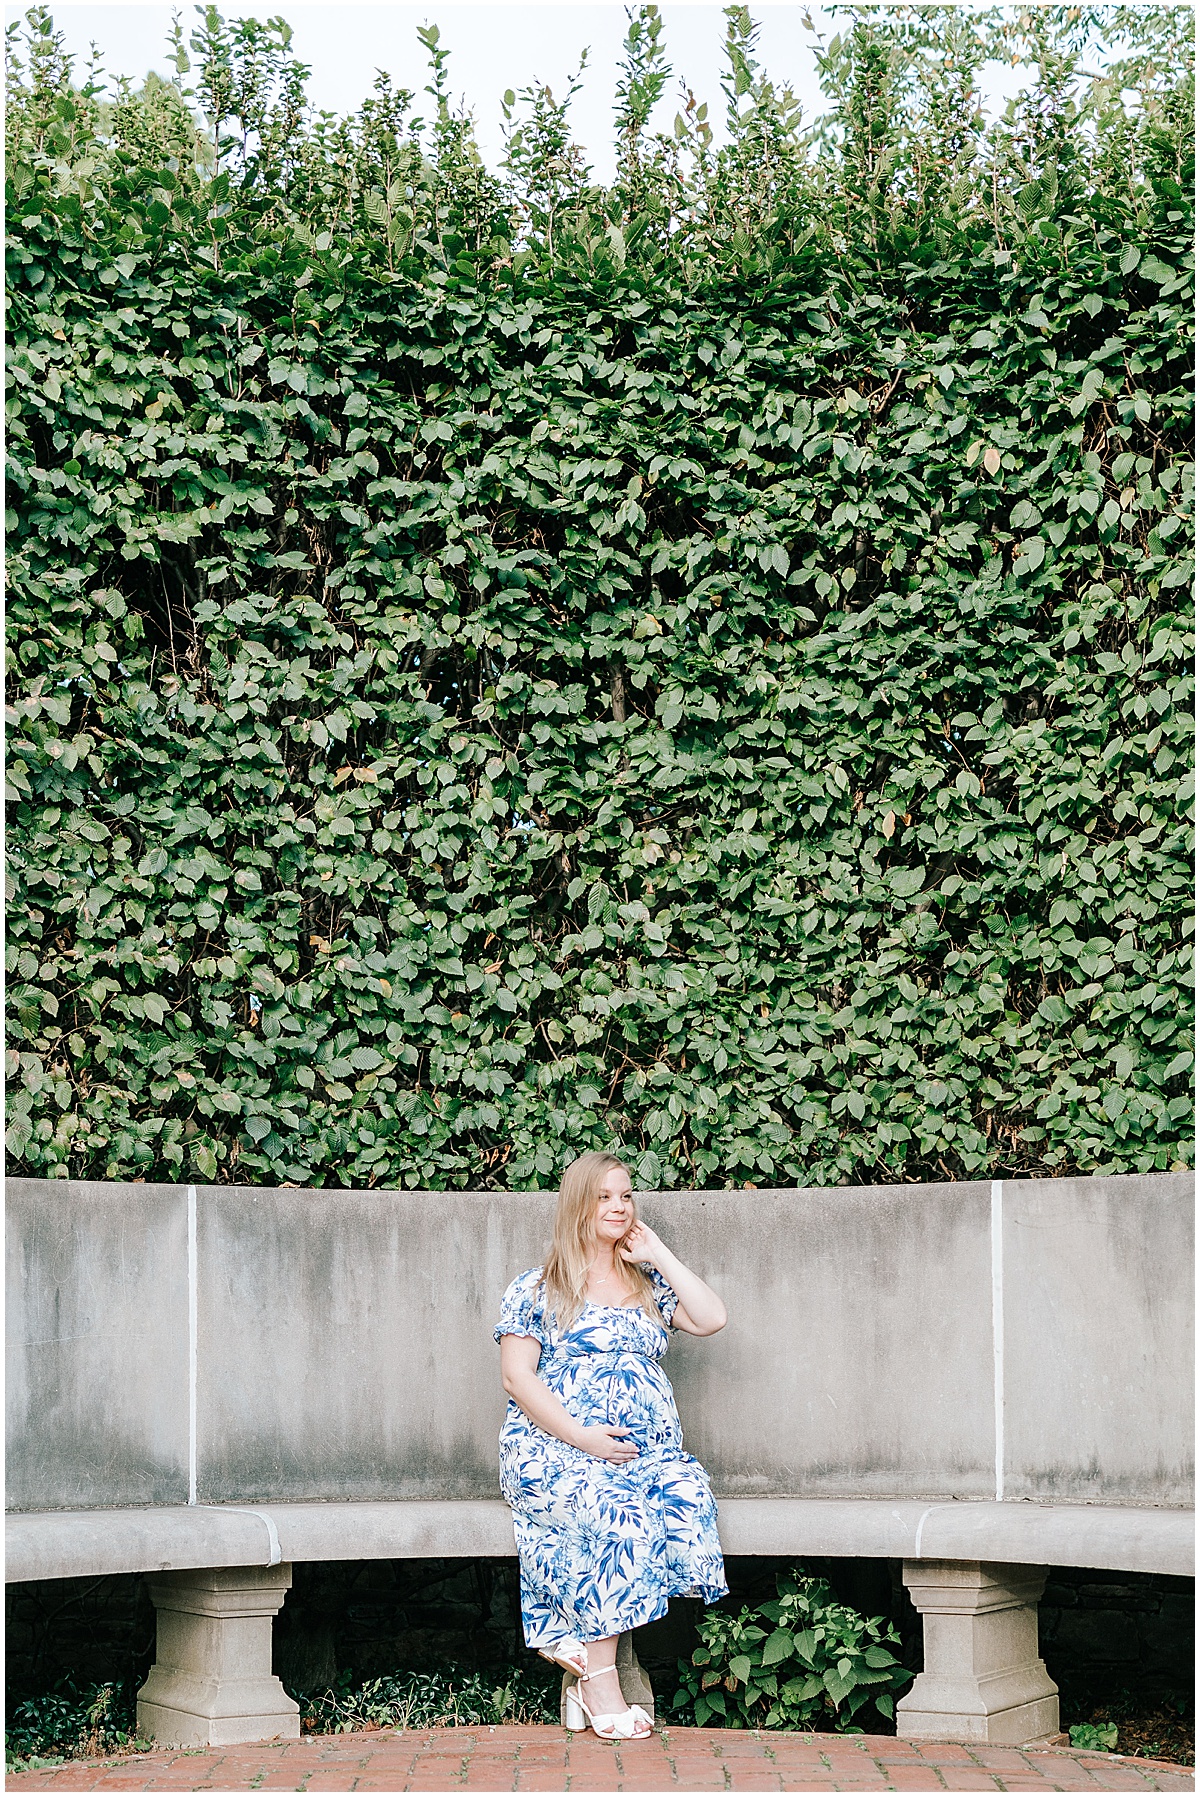 Longwood gardens maternity portraits with Katie for her baby boy. Katie is seen wearing a blue maternity dress surrounded by the greenery of the botanical gardens